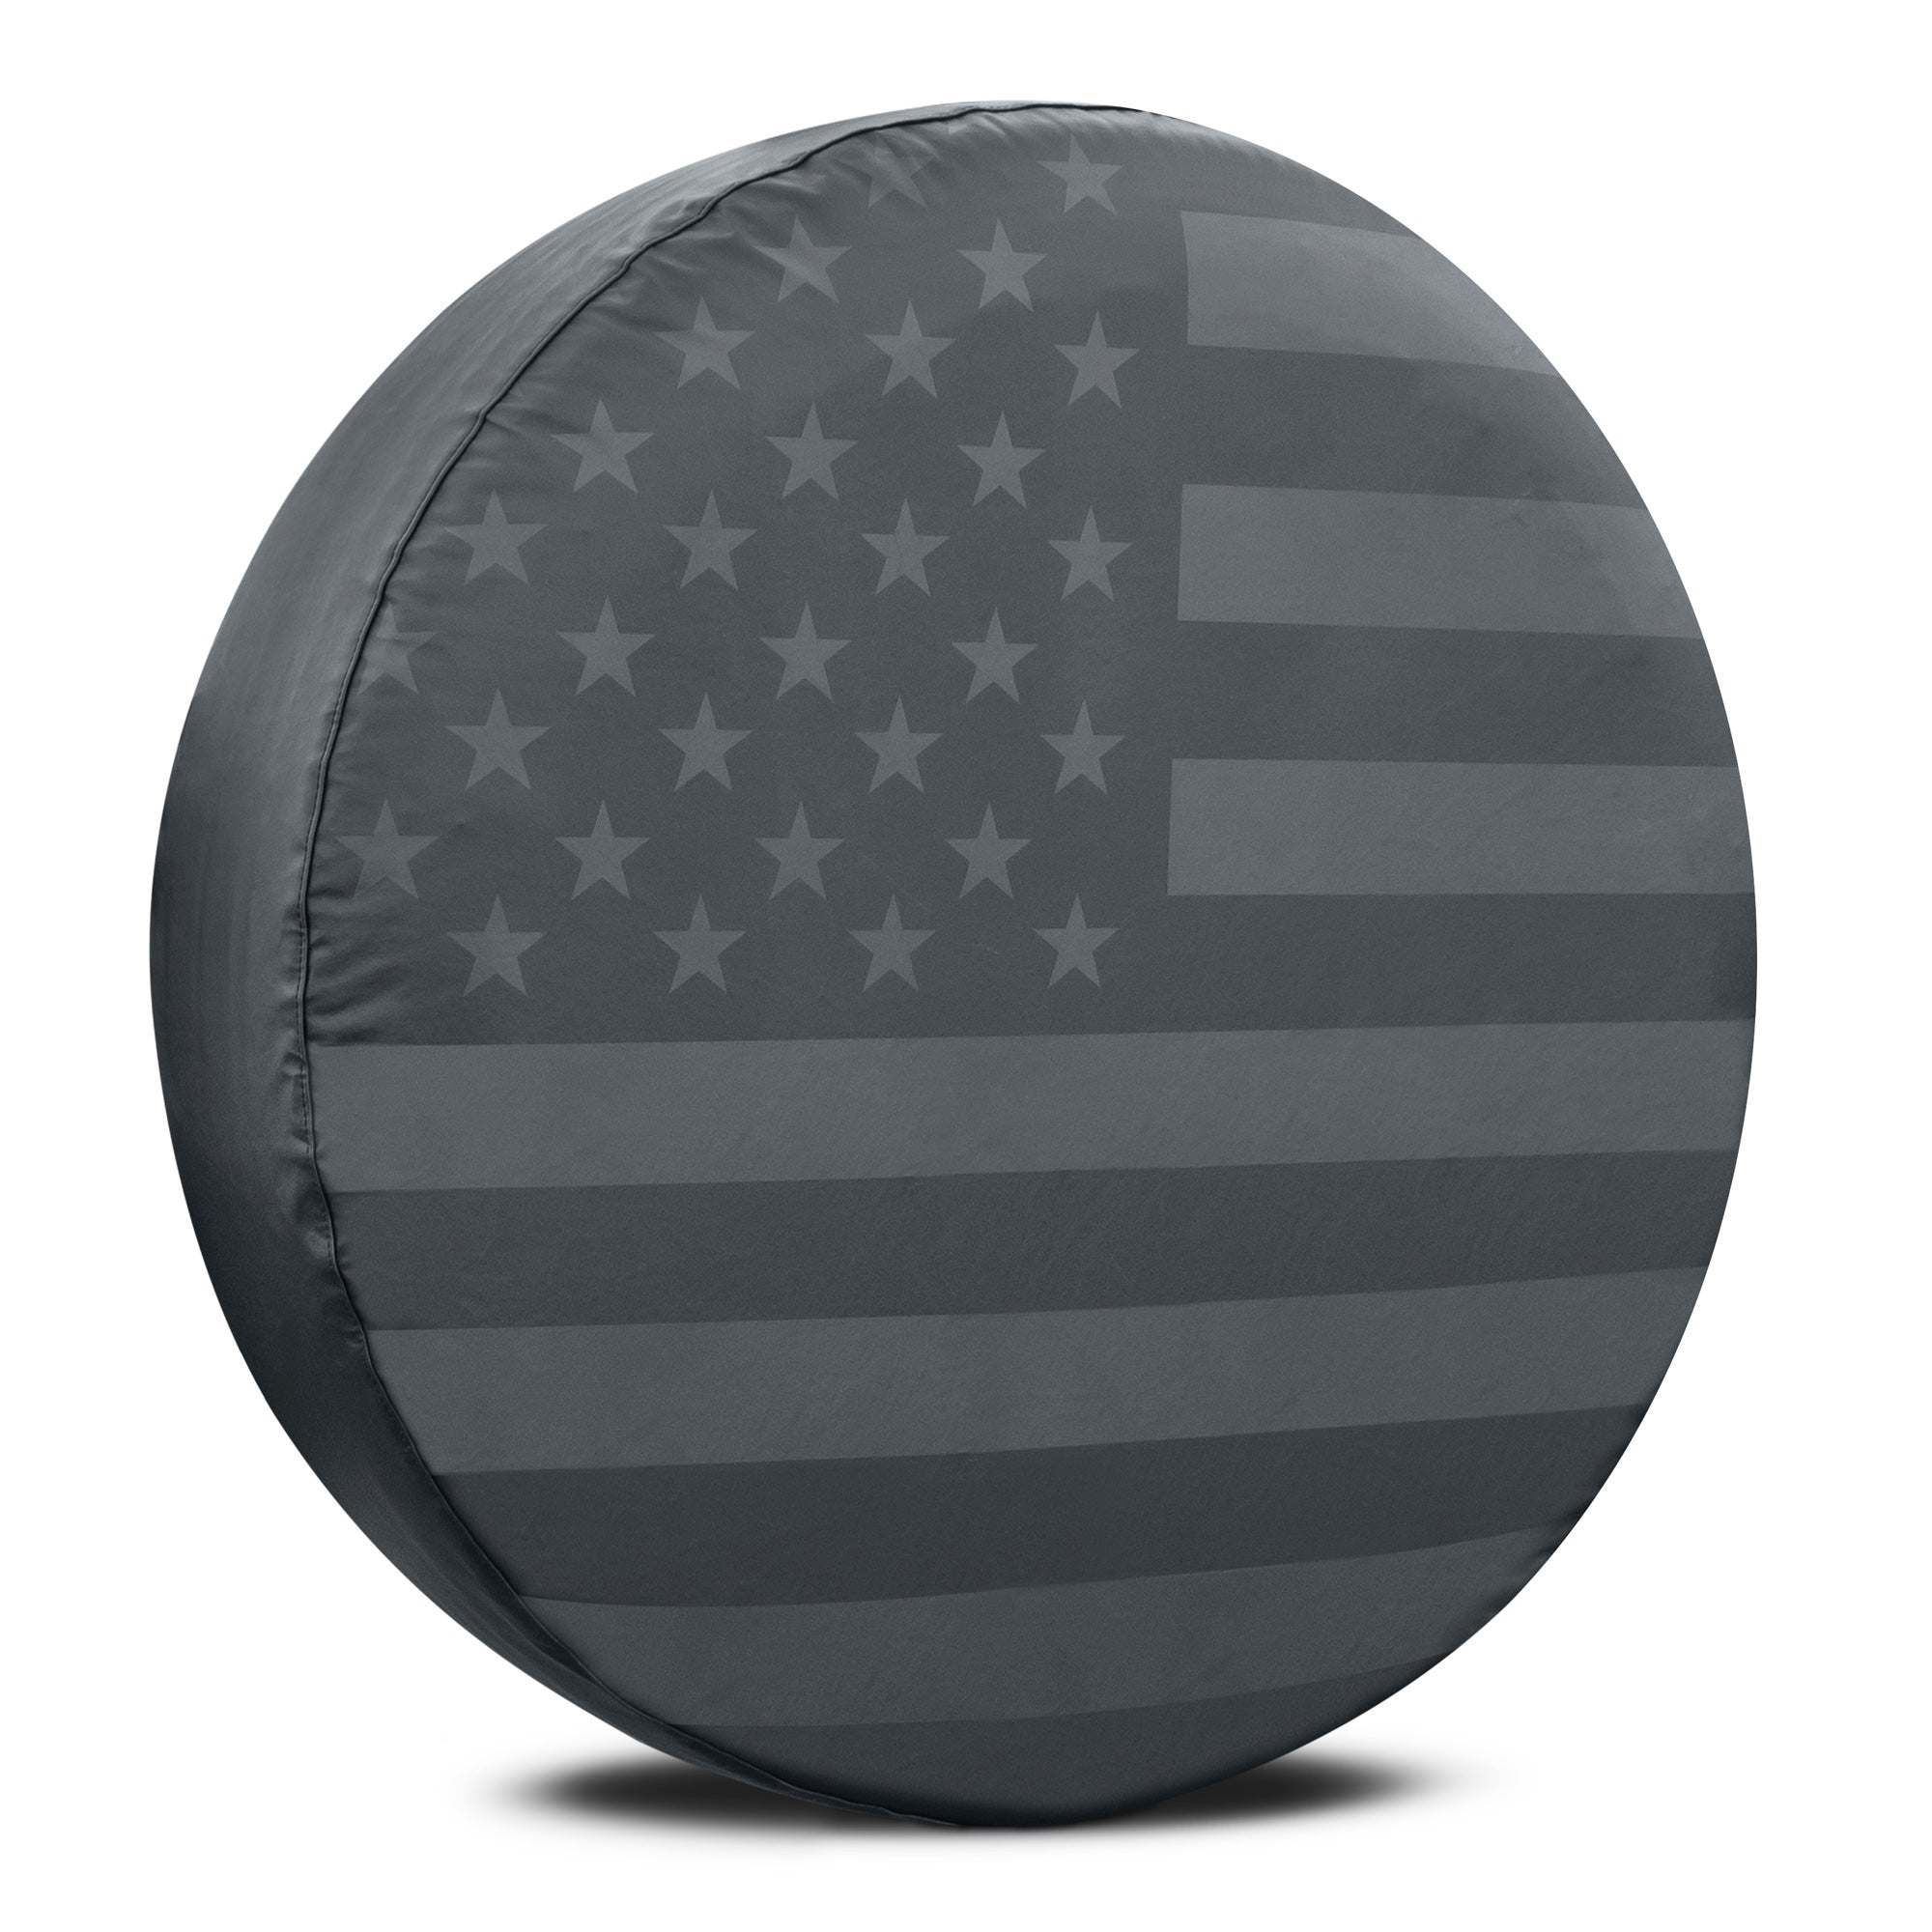 Black & Gray American Flag Spare Tire Cover for 16, 17 Inch Wheels Fits Jeep Wrangler SUVs Campers RV Accessories All Weather Premium Wheel Cover